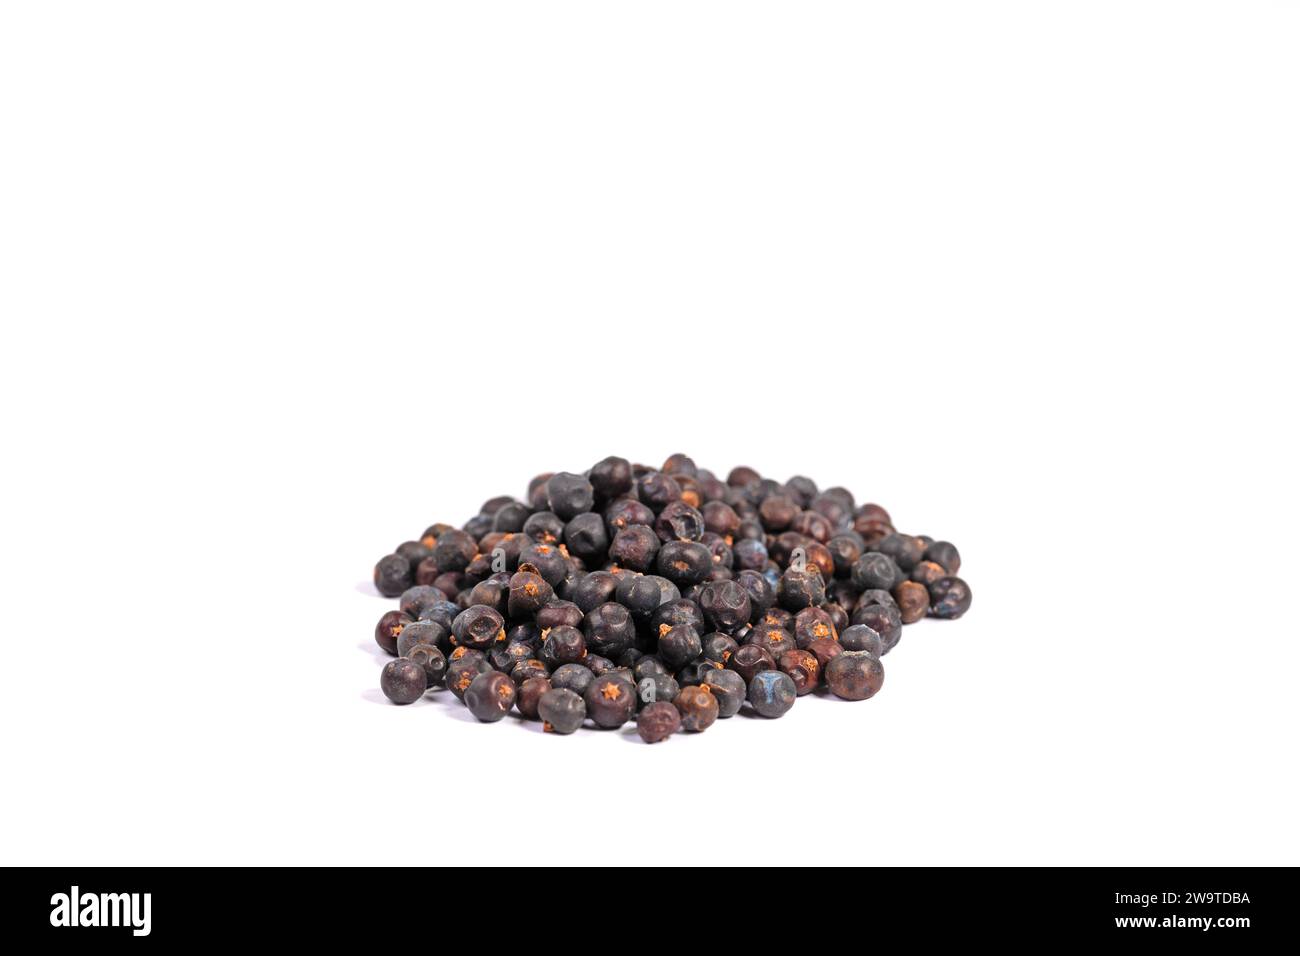 Dried juniper berries against a white background Stock Photo